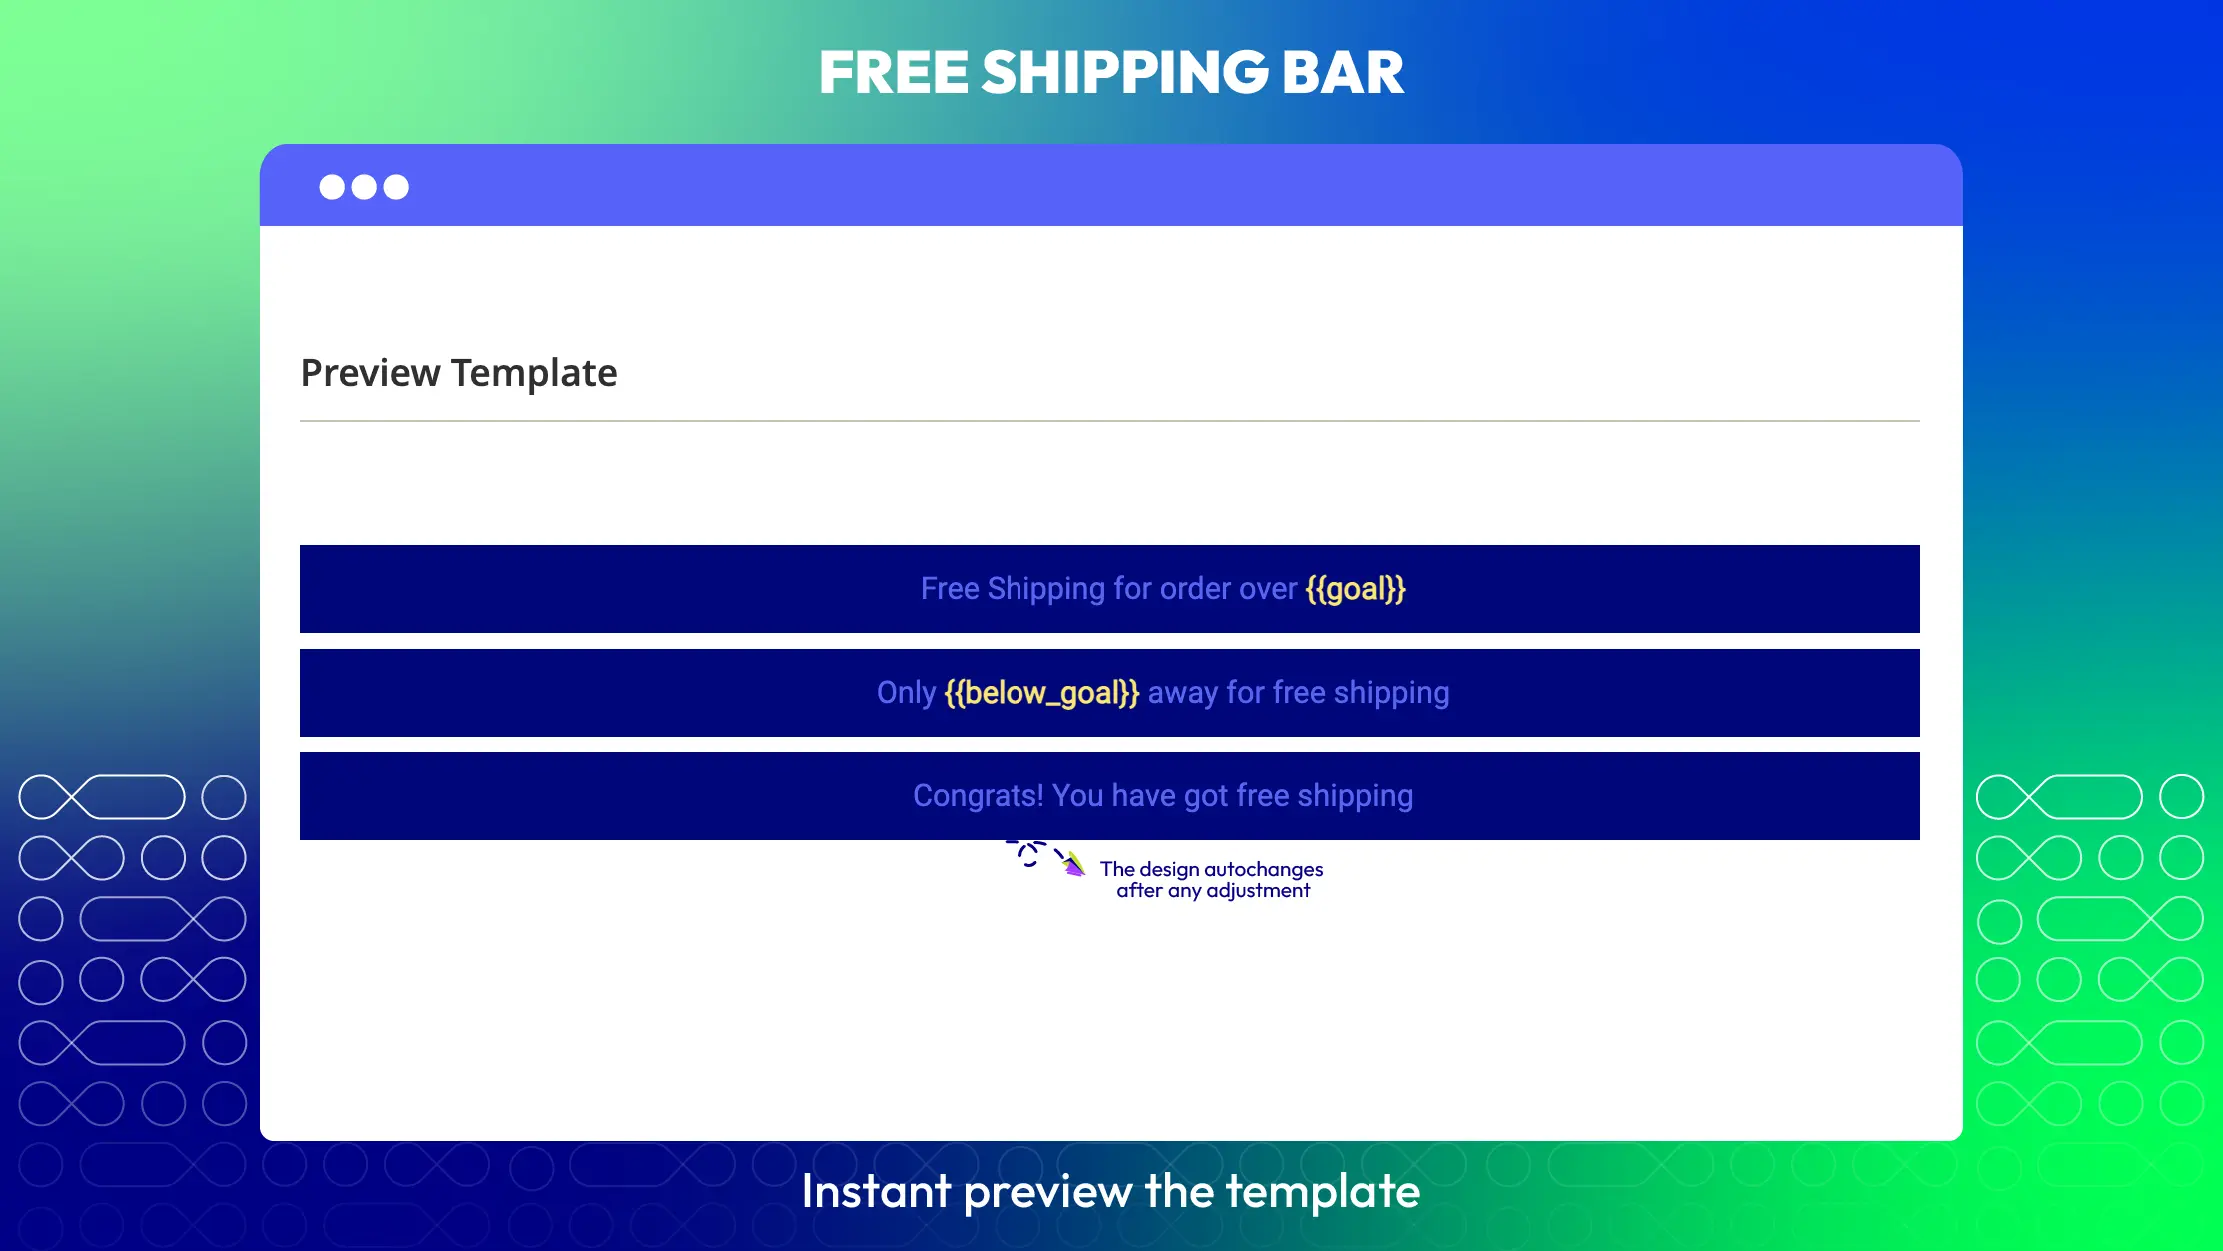 magento 2.1 - Free shipping message bar for M2 - Magento Stack